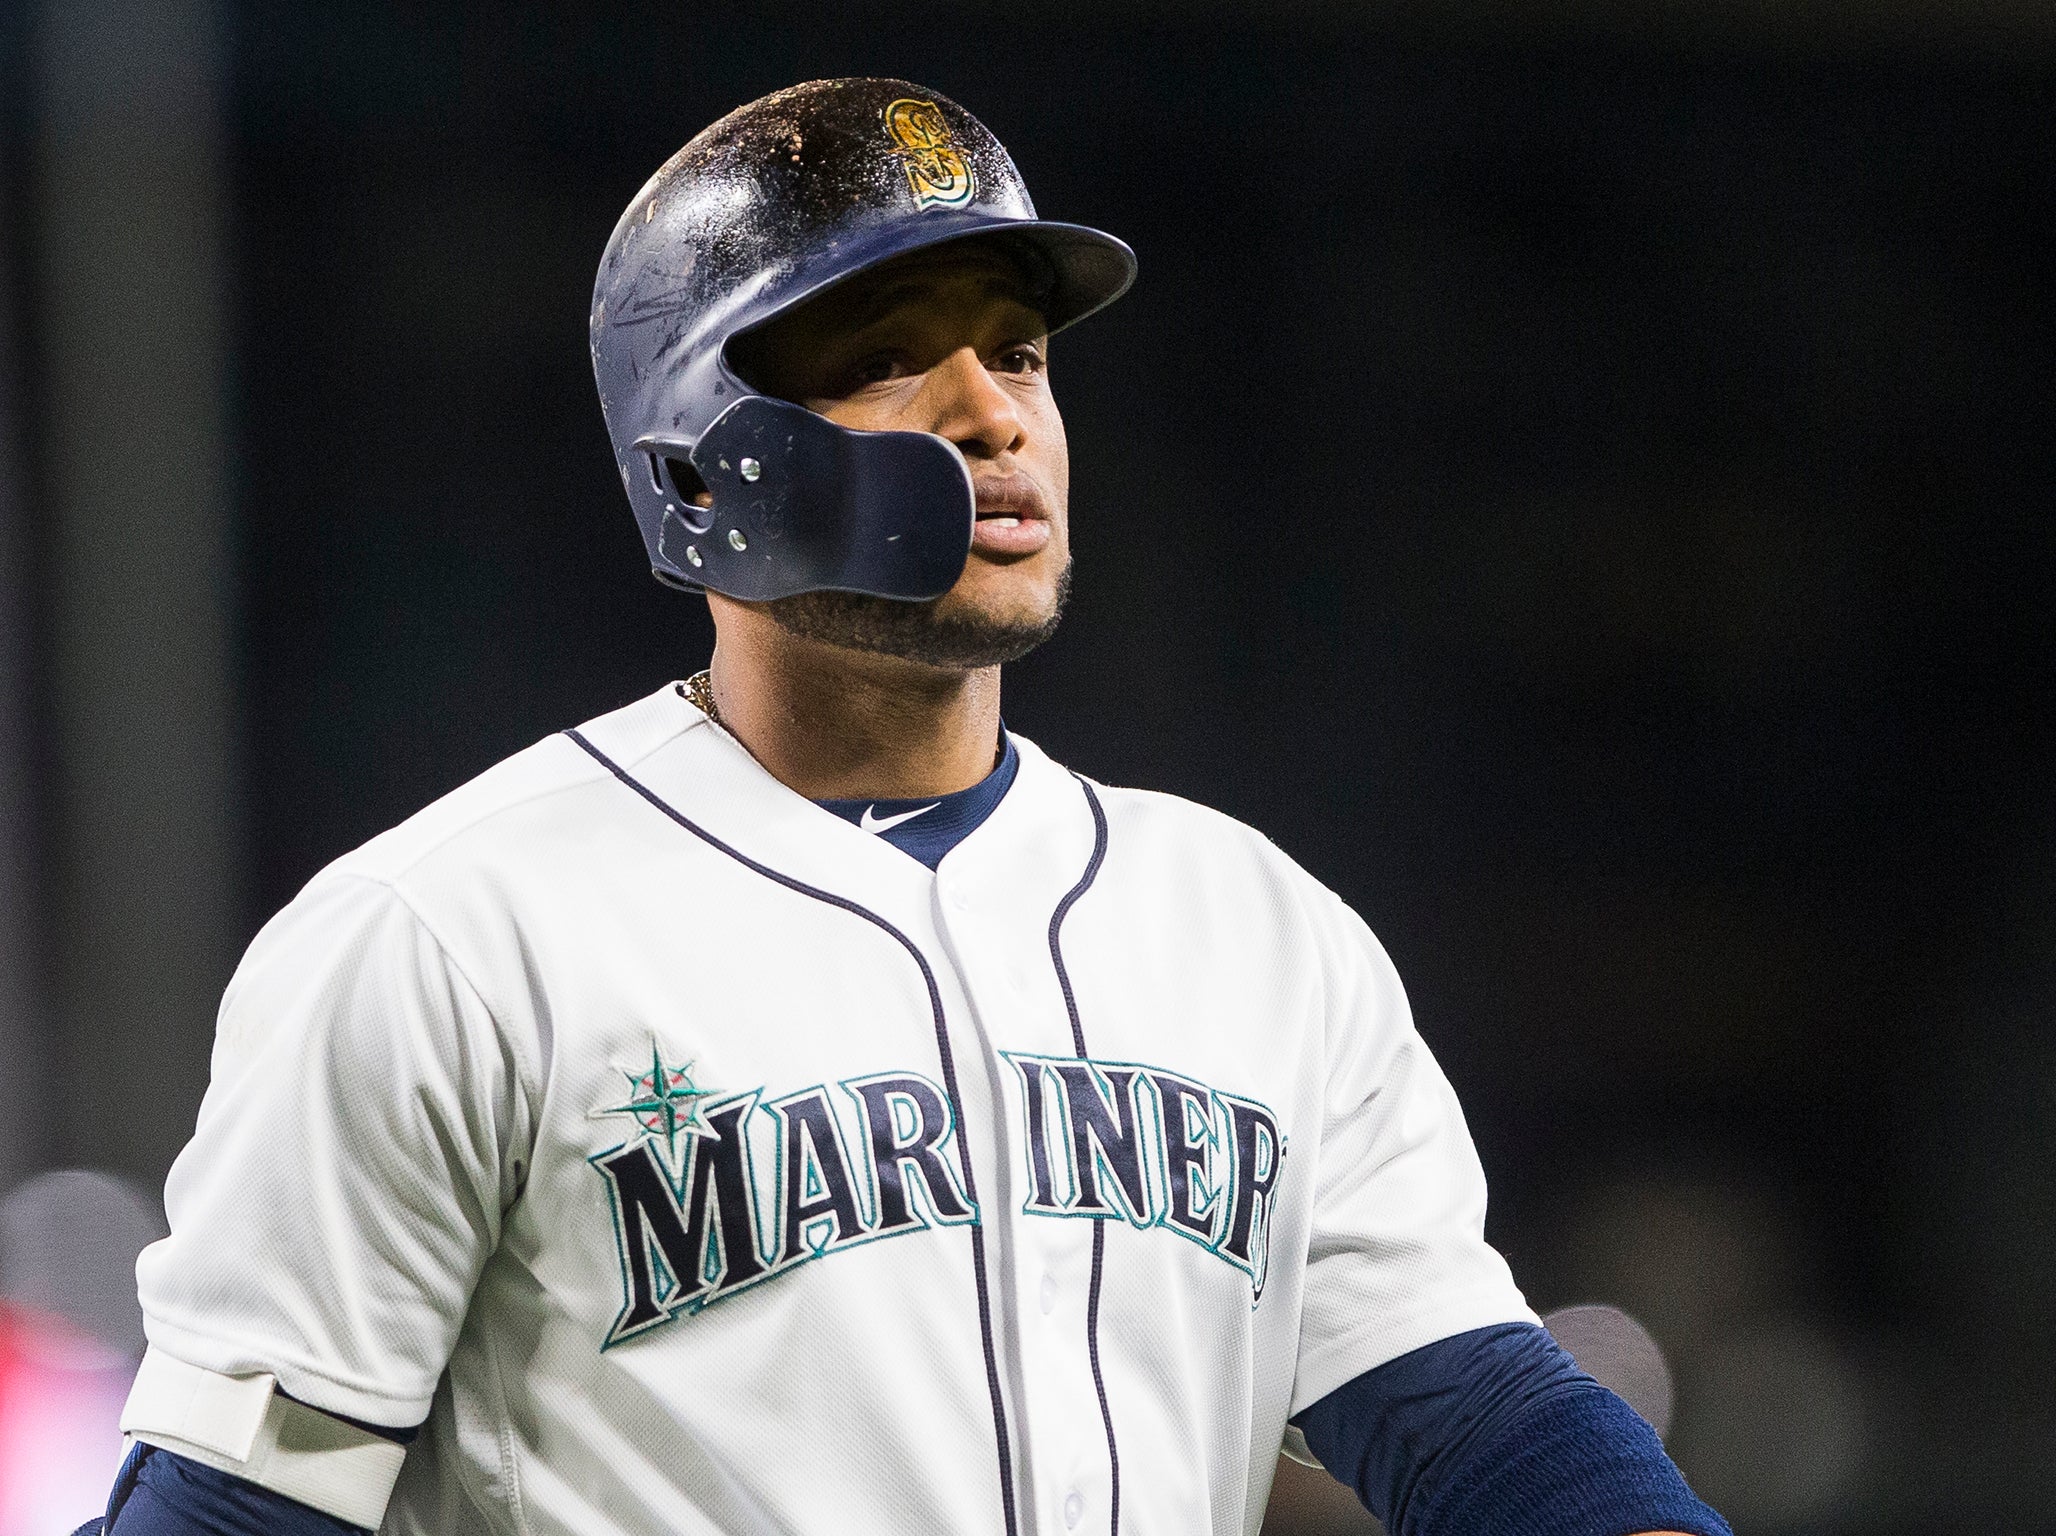 Robinson Cano is one of baseball's highest paid players